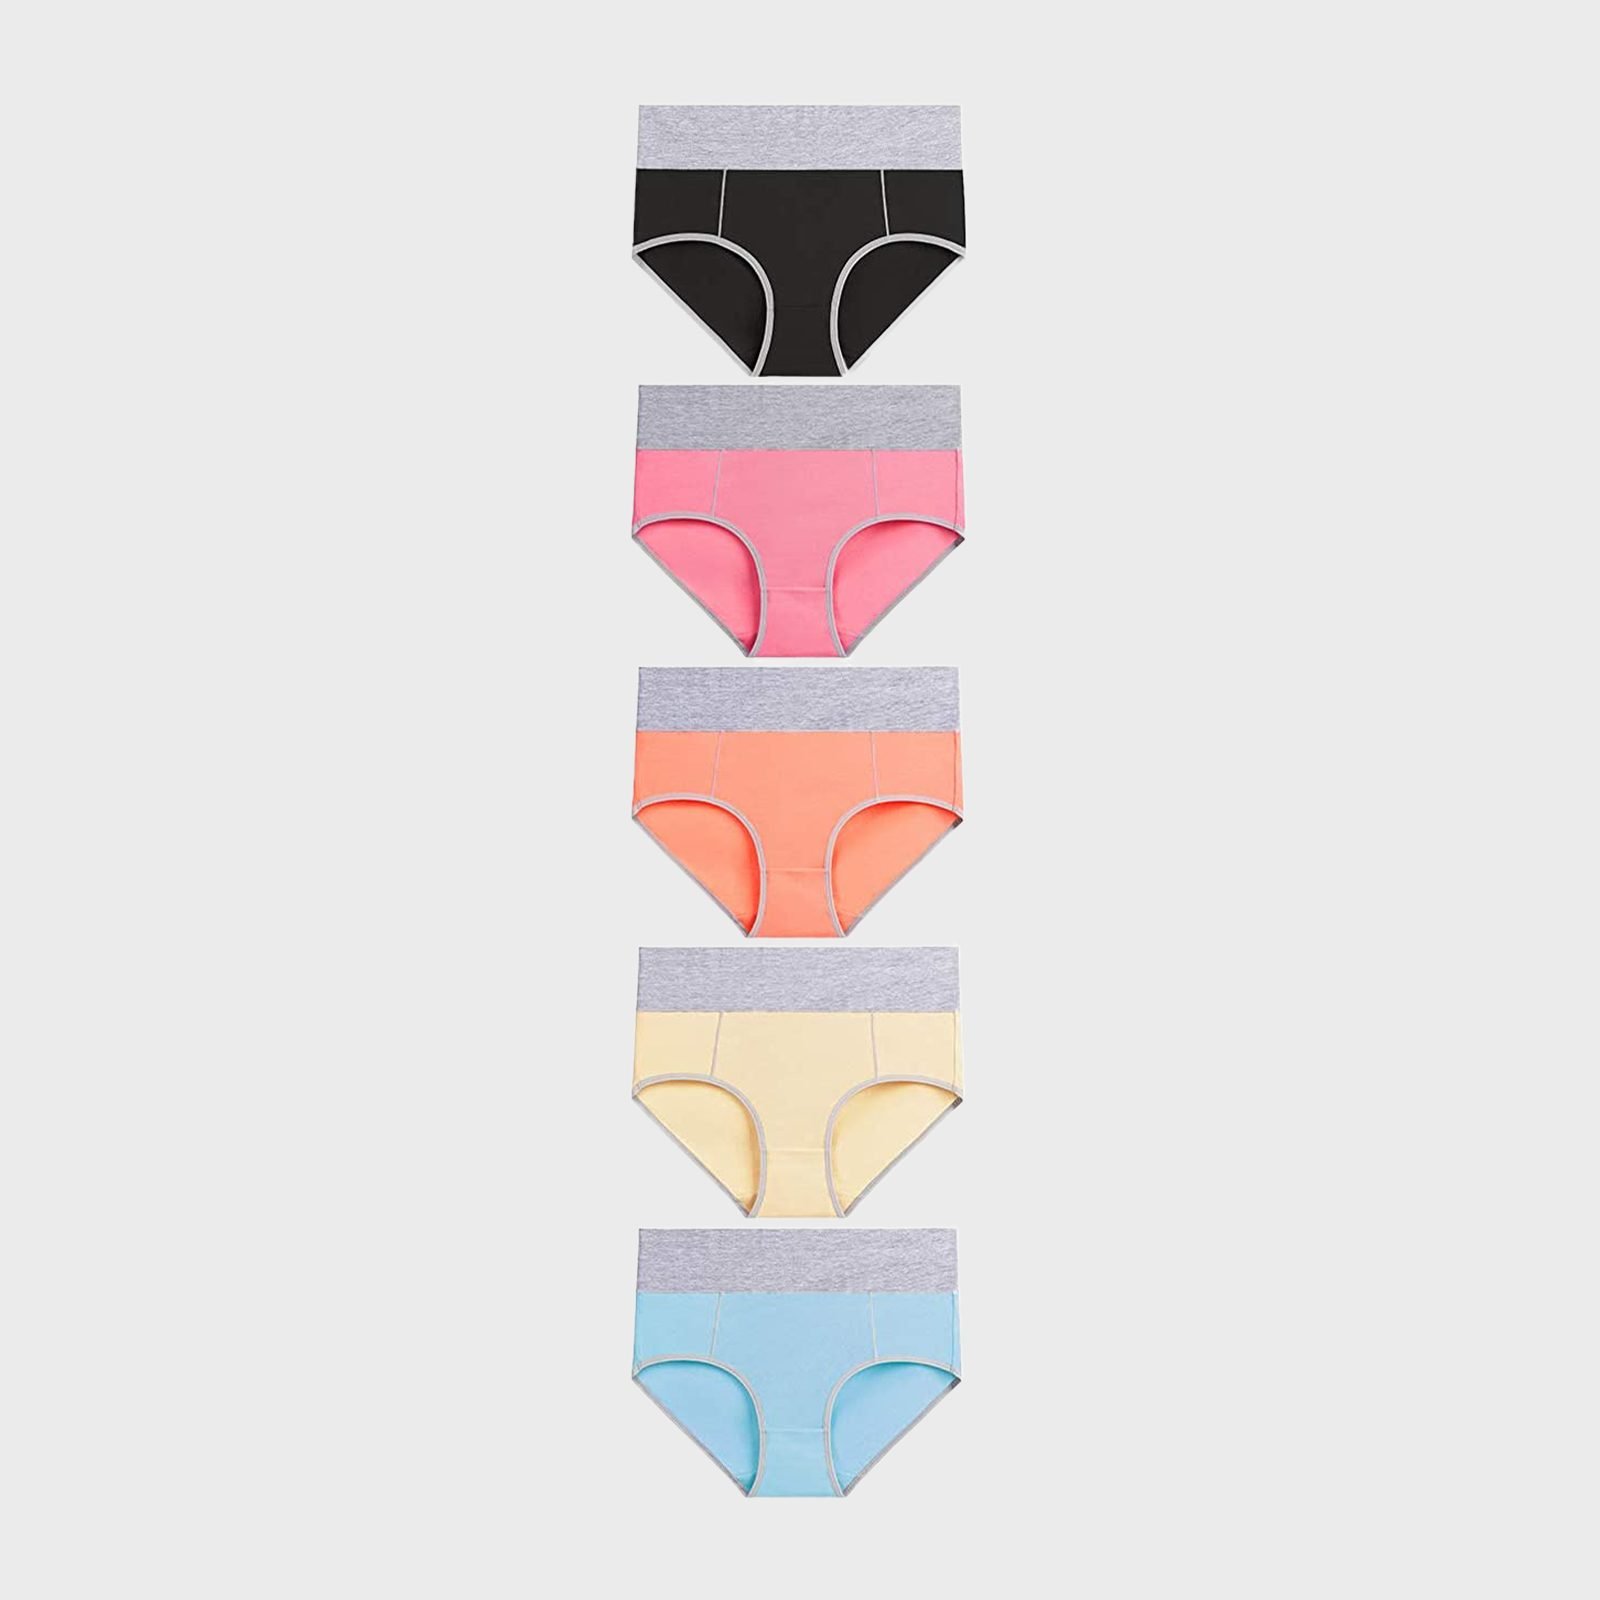 Types Women's Underwear: Over 402 Royalty-Free Licensable Stock